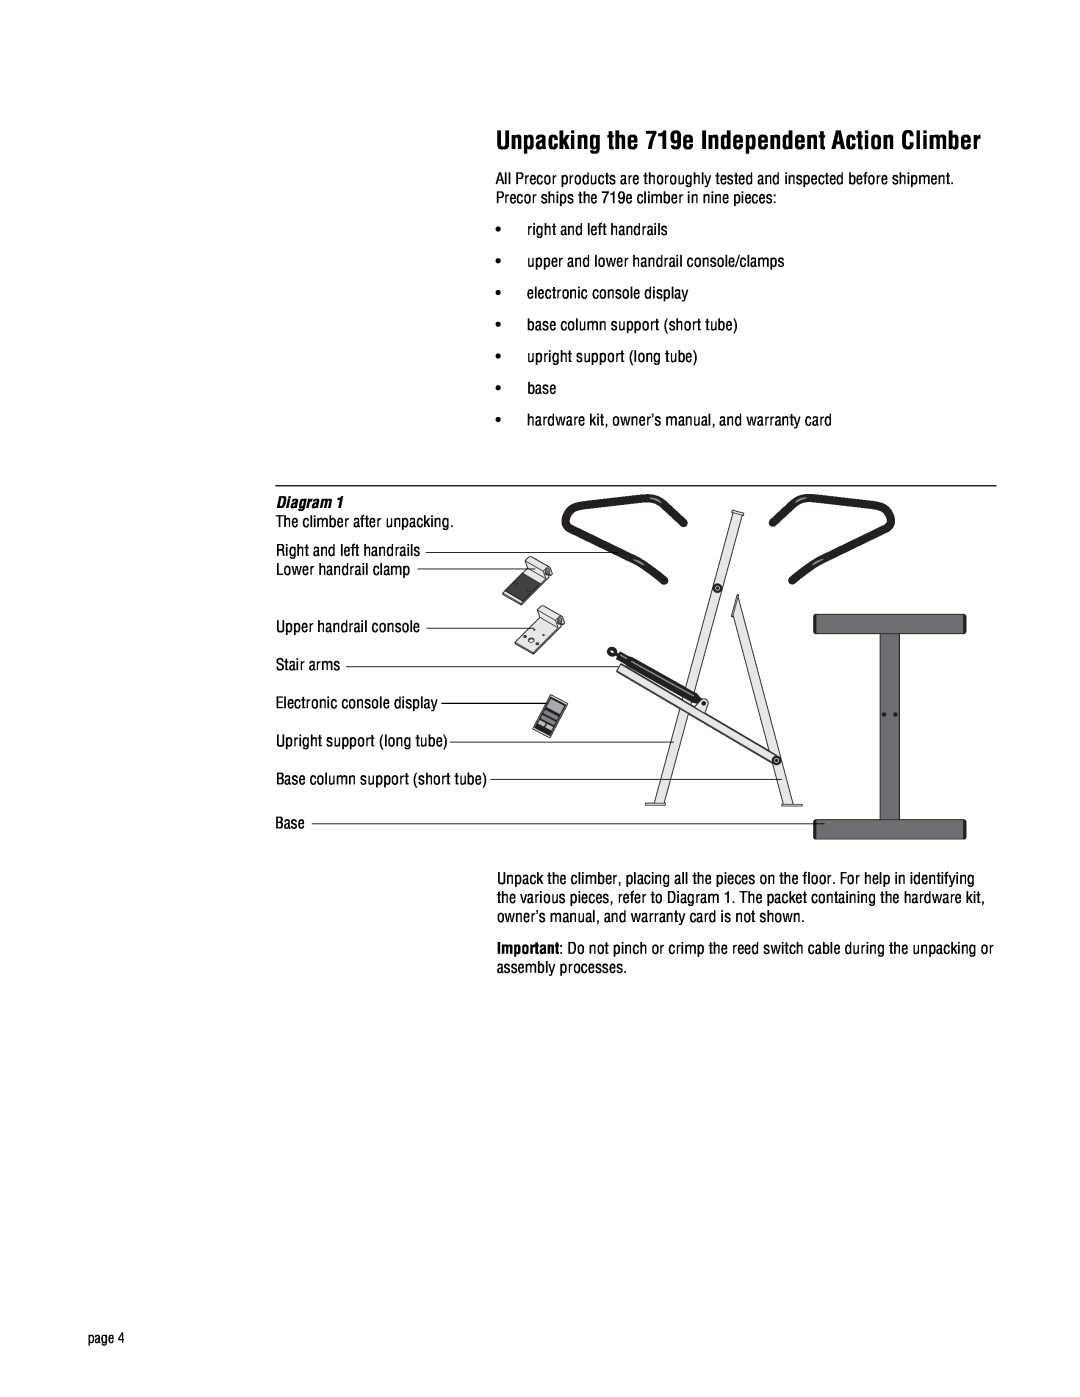 Precor owner manual Unpacking the 719e Independent Action Climber, Diagram 